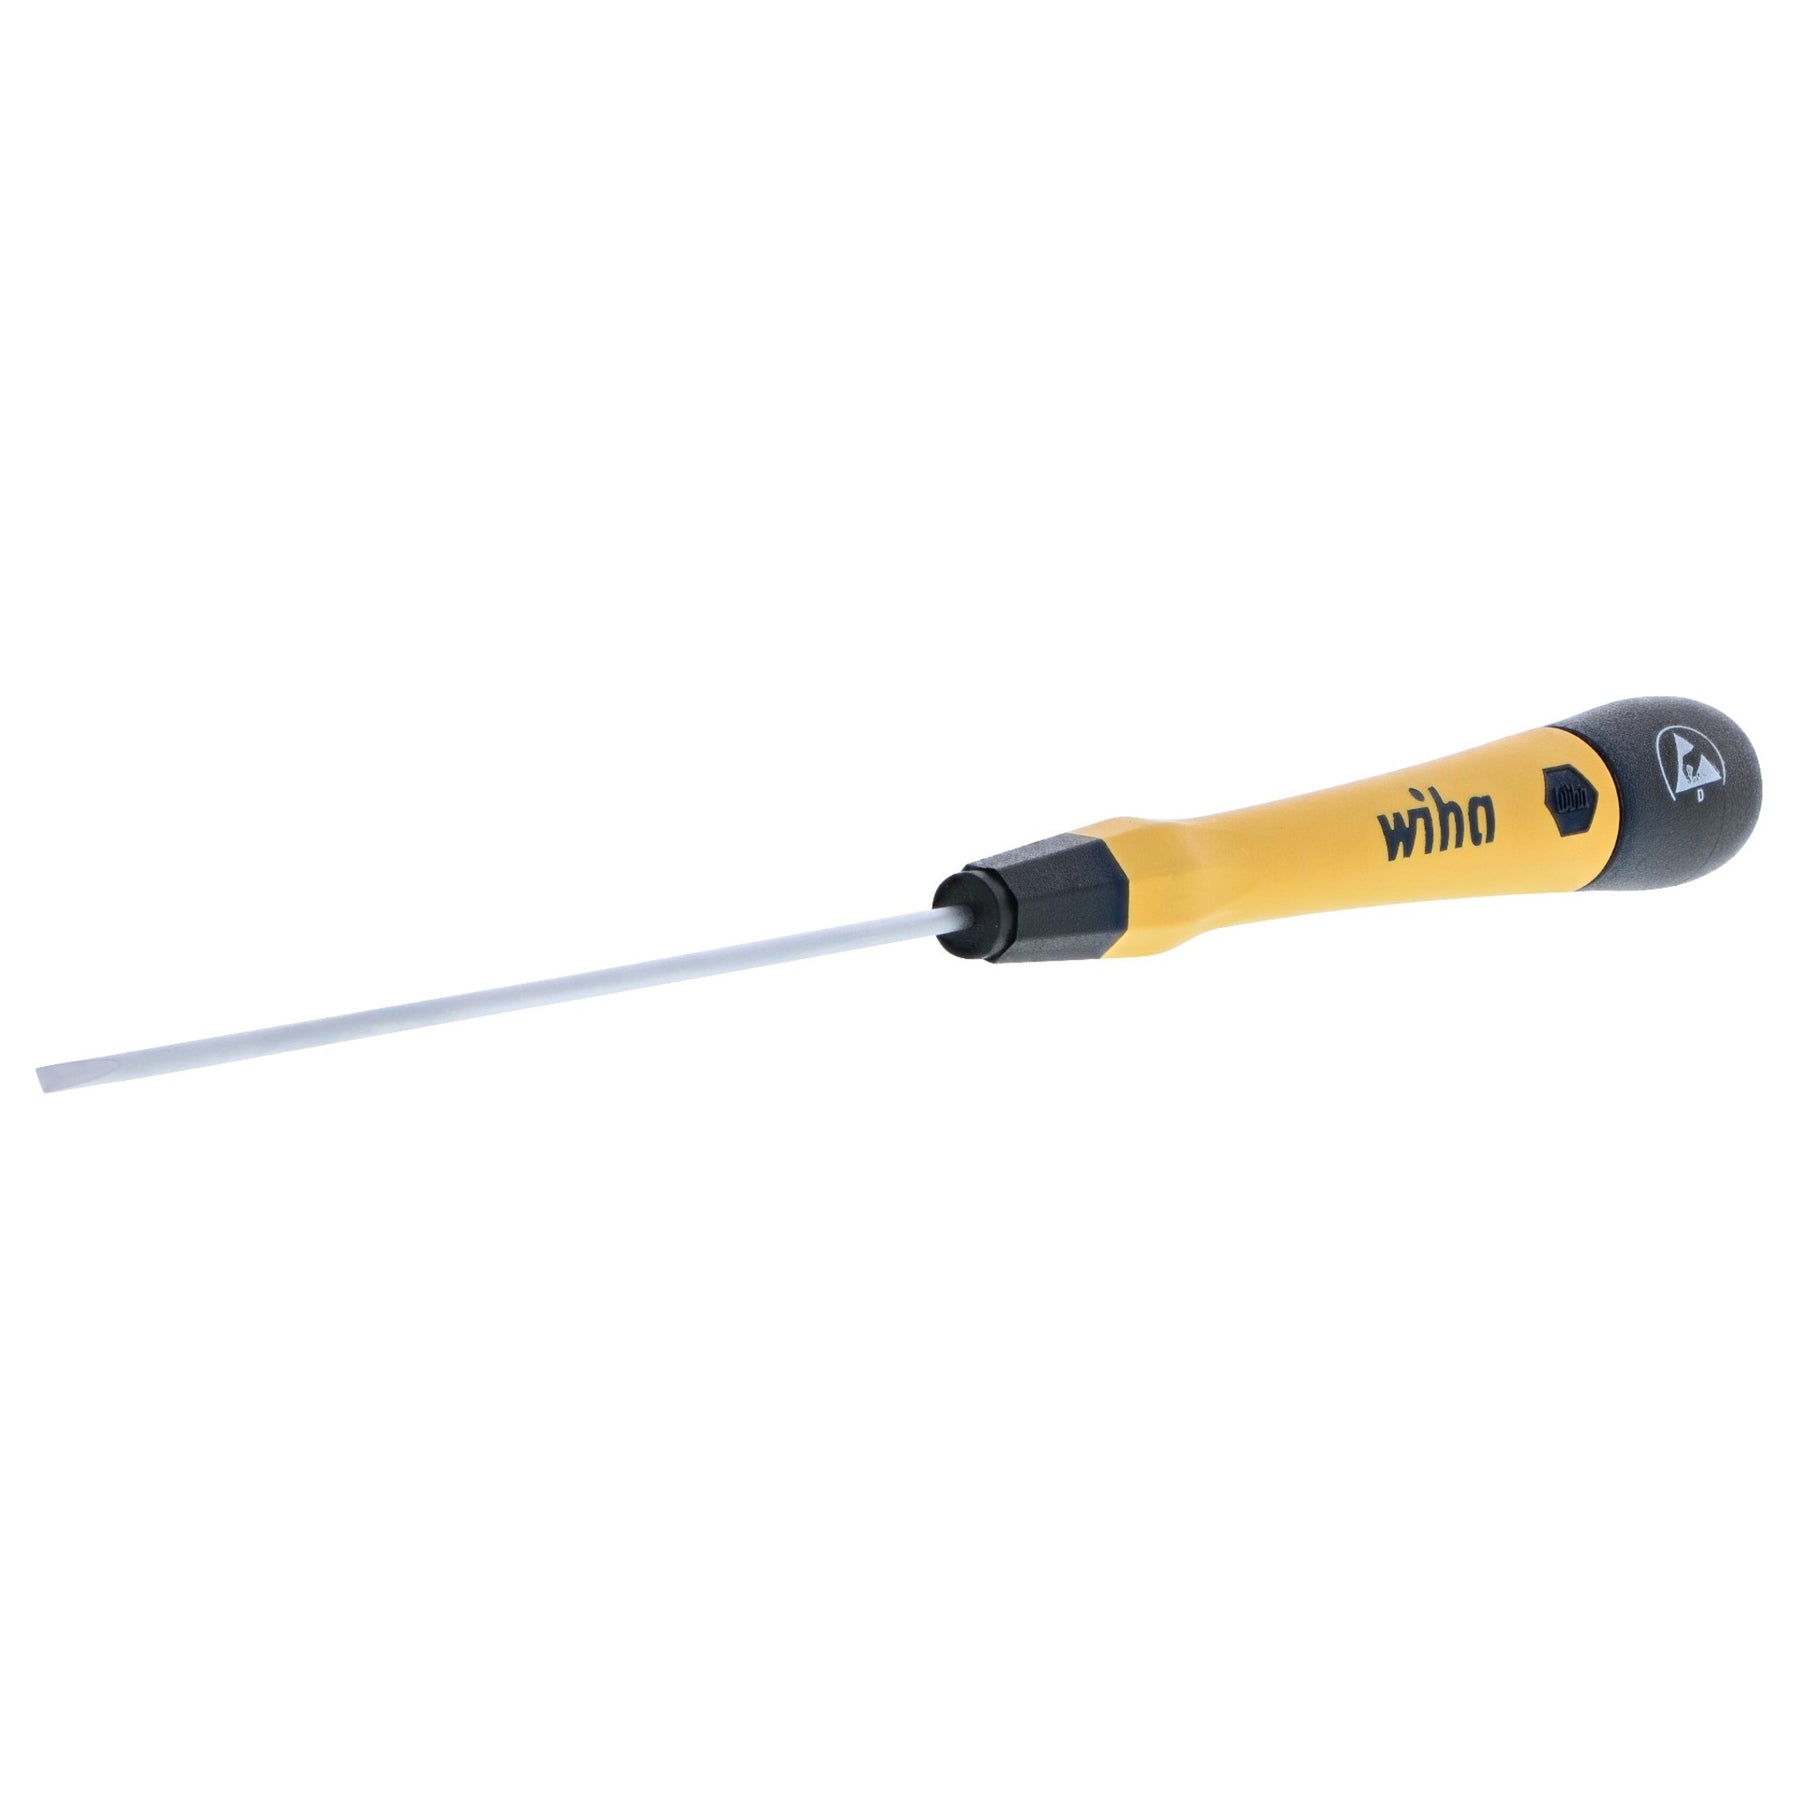 ESD Safe PicoFinish Precision Screwdriver - Slotted 2.0mm x 100mm